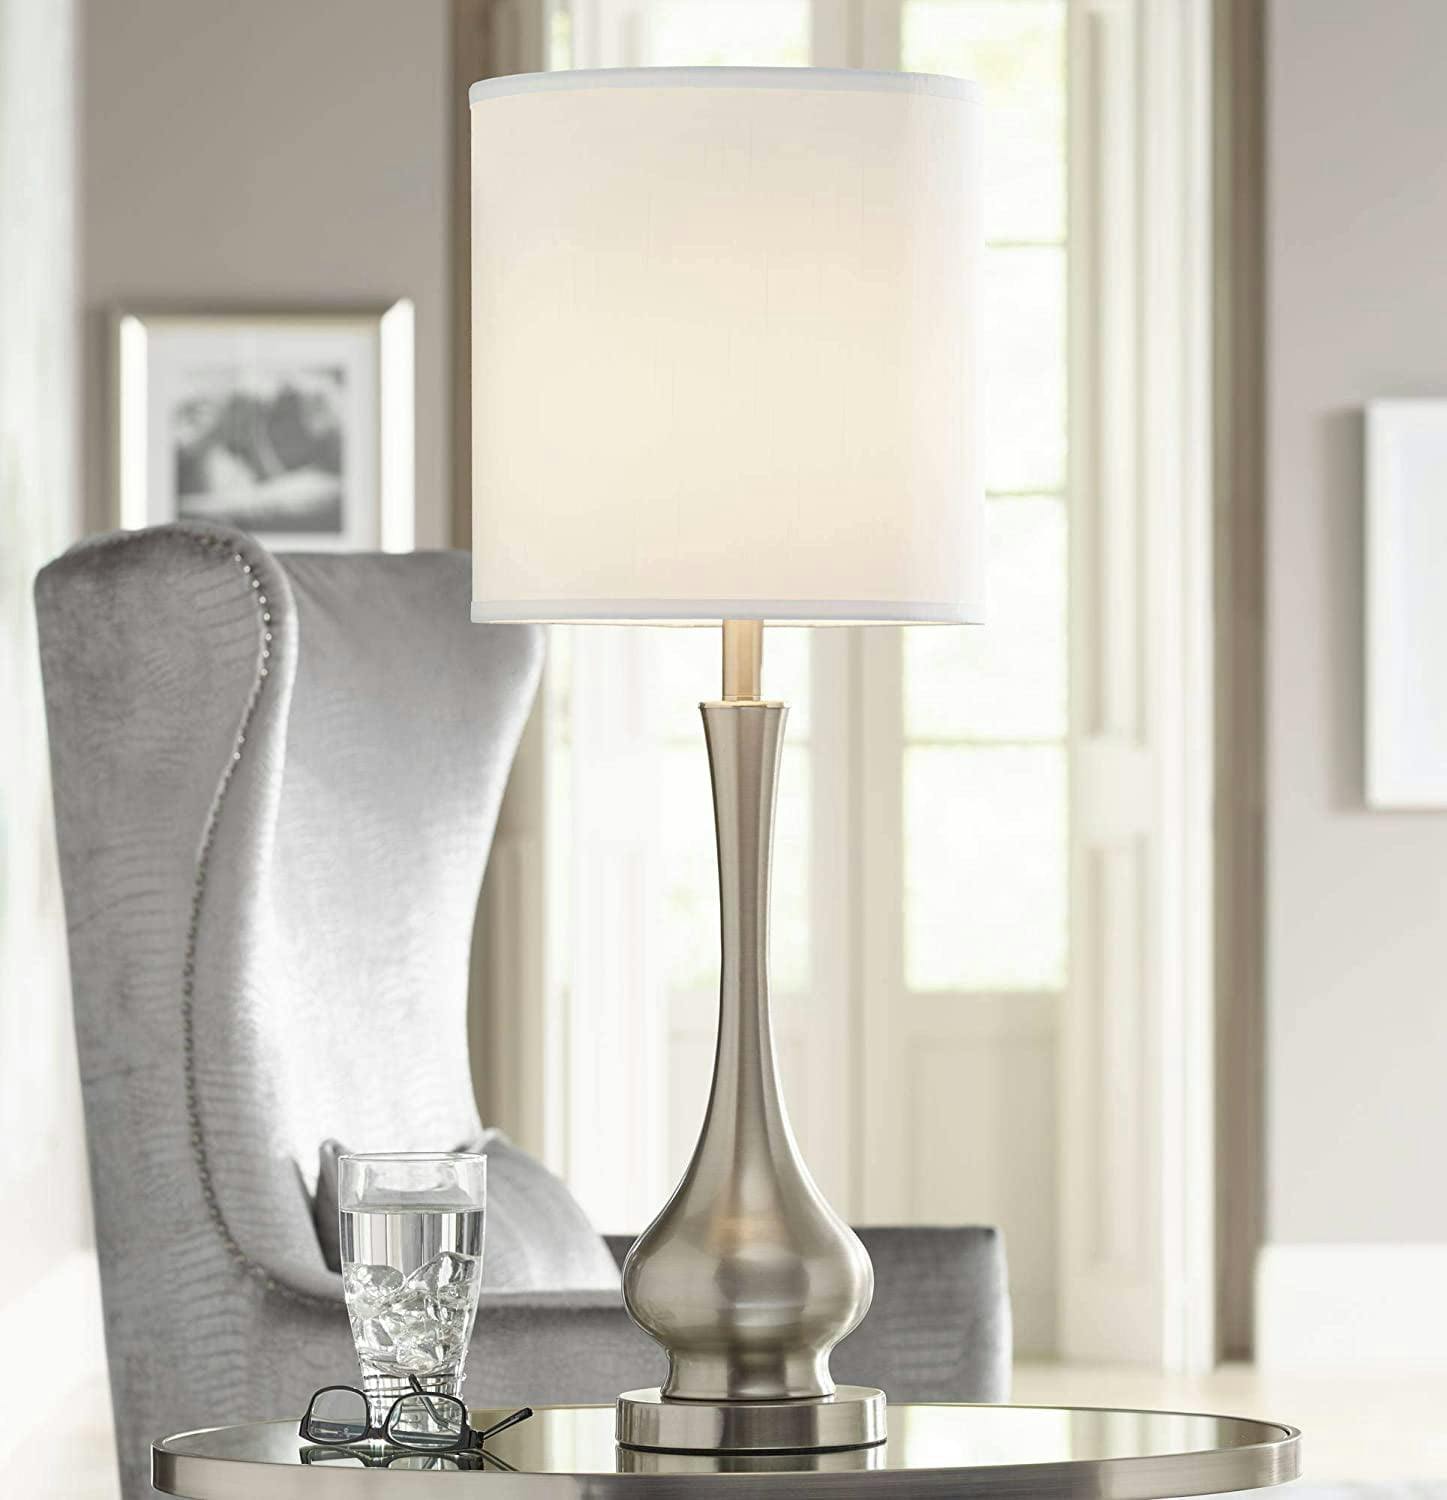 Brushed Nickel Gourd Table Lamp with White Fabric Shade